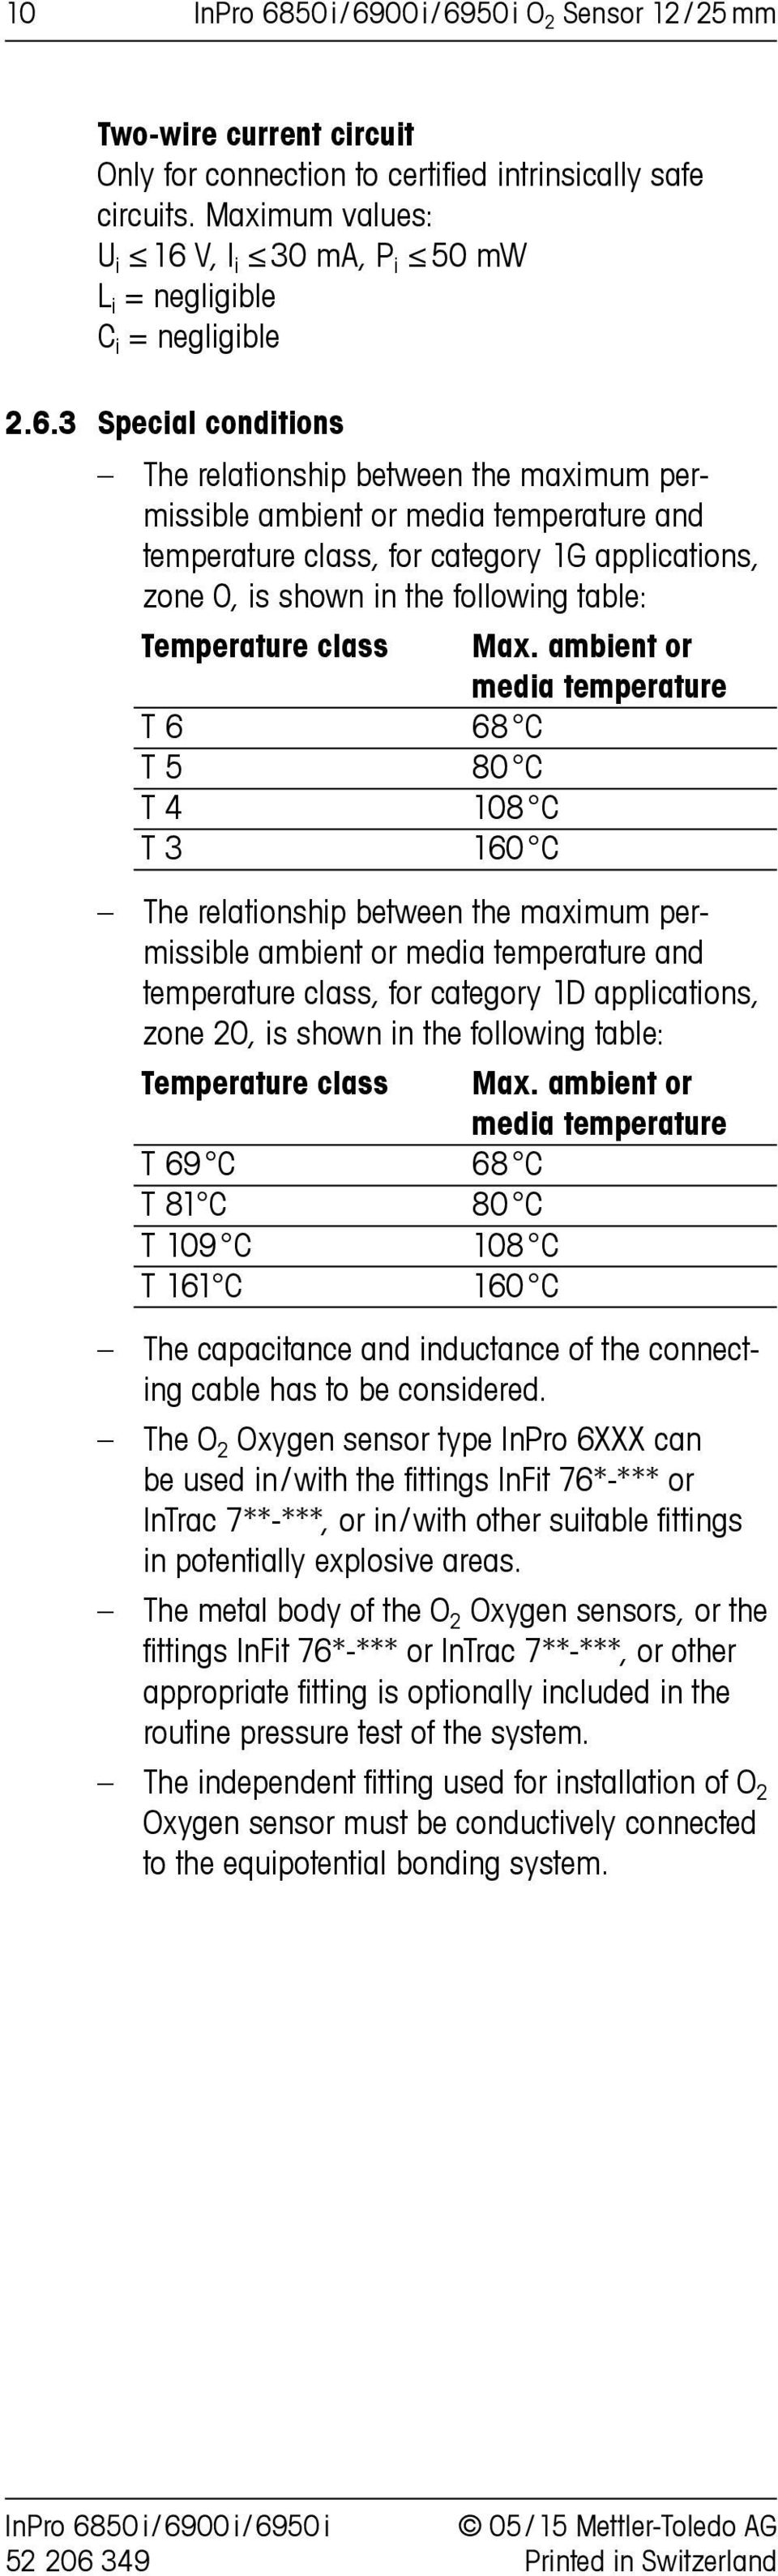 3 Special conditions The relationship between the maximum permissible ambient or media temperature and temperature class, for category 1G applications, zone 0, is shown in the following table: